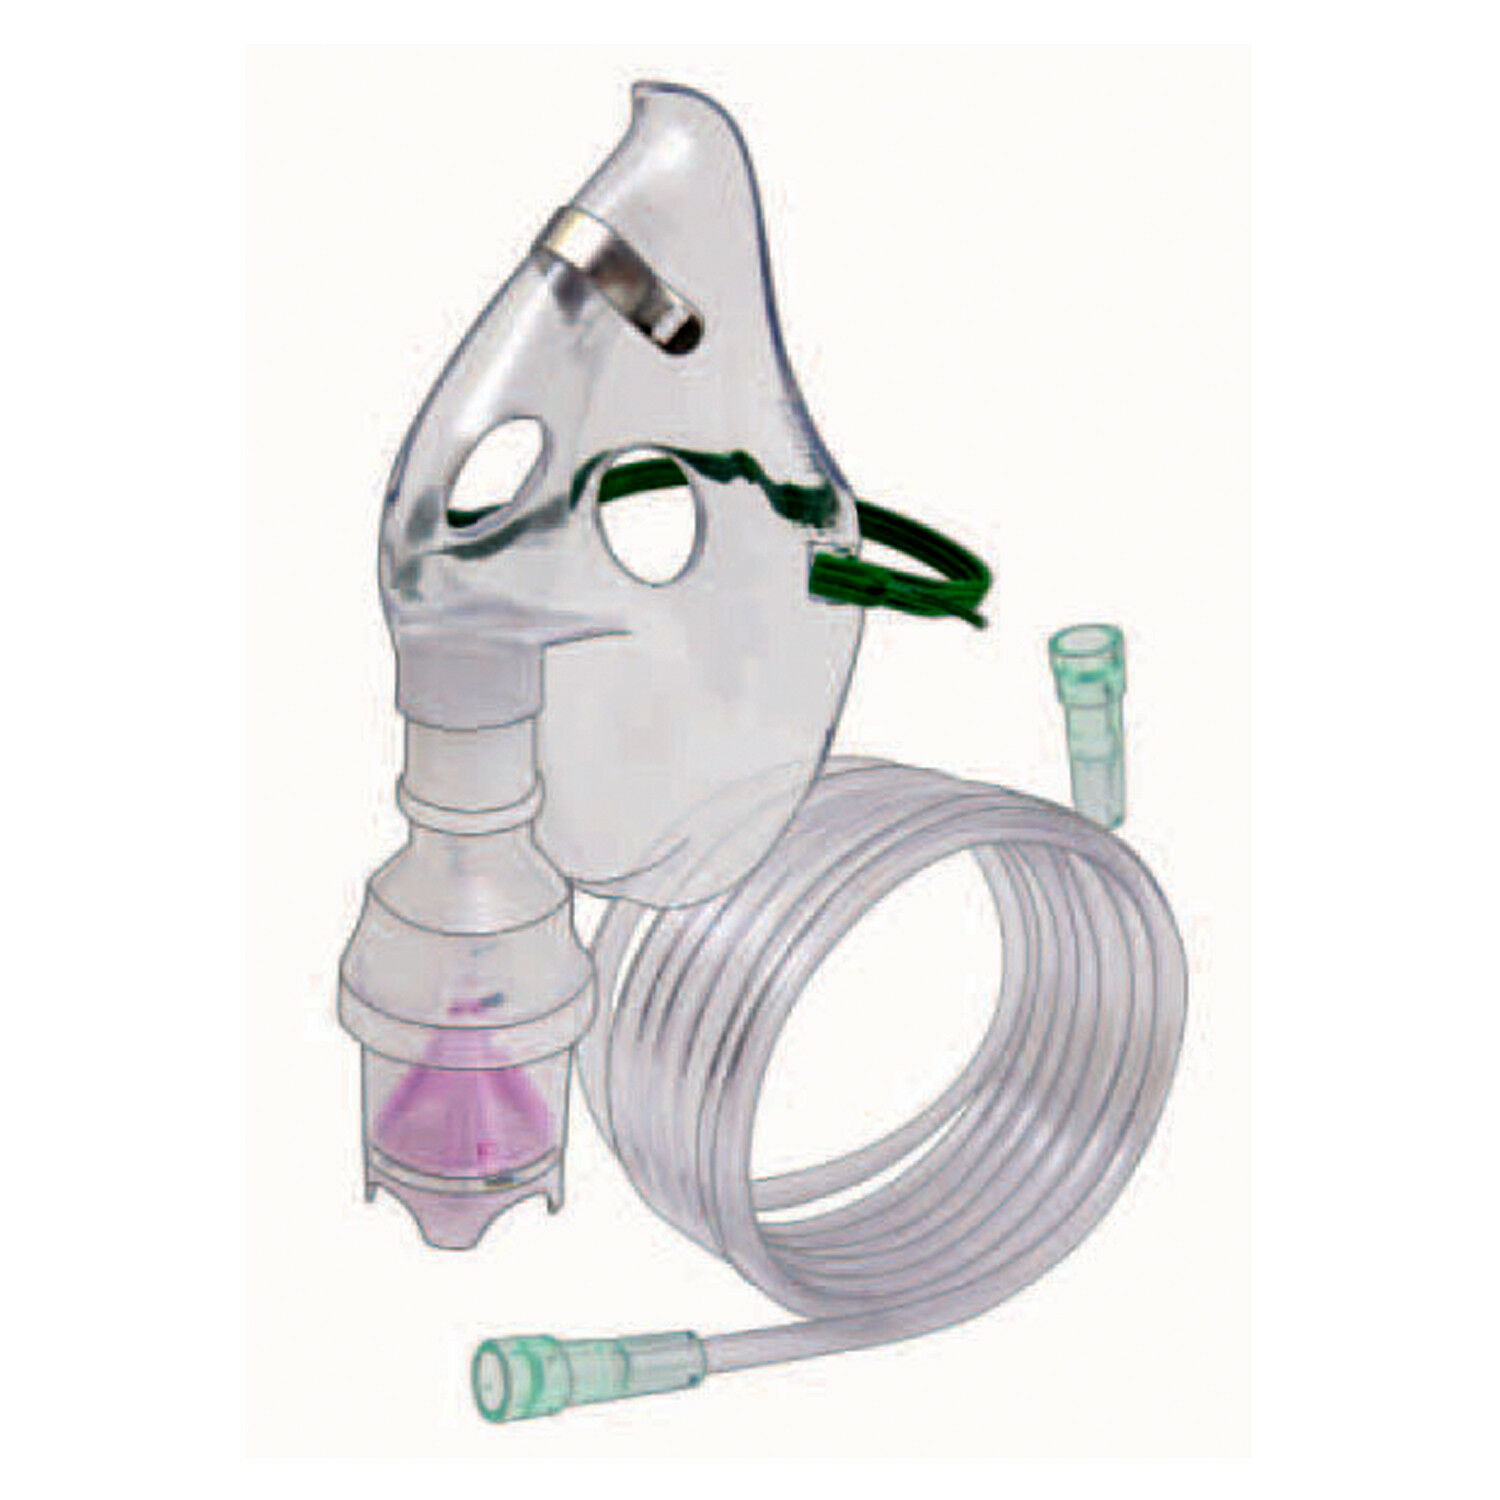 5 New Adult Aerosol Masks With Full Kits Includes Tubing, Med Cup